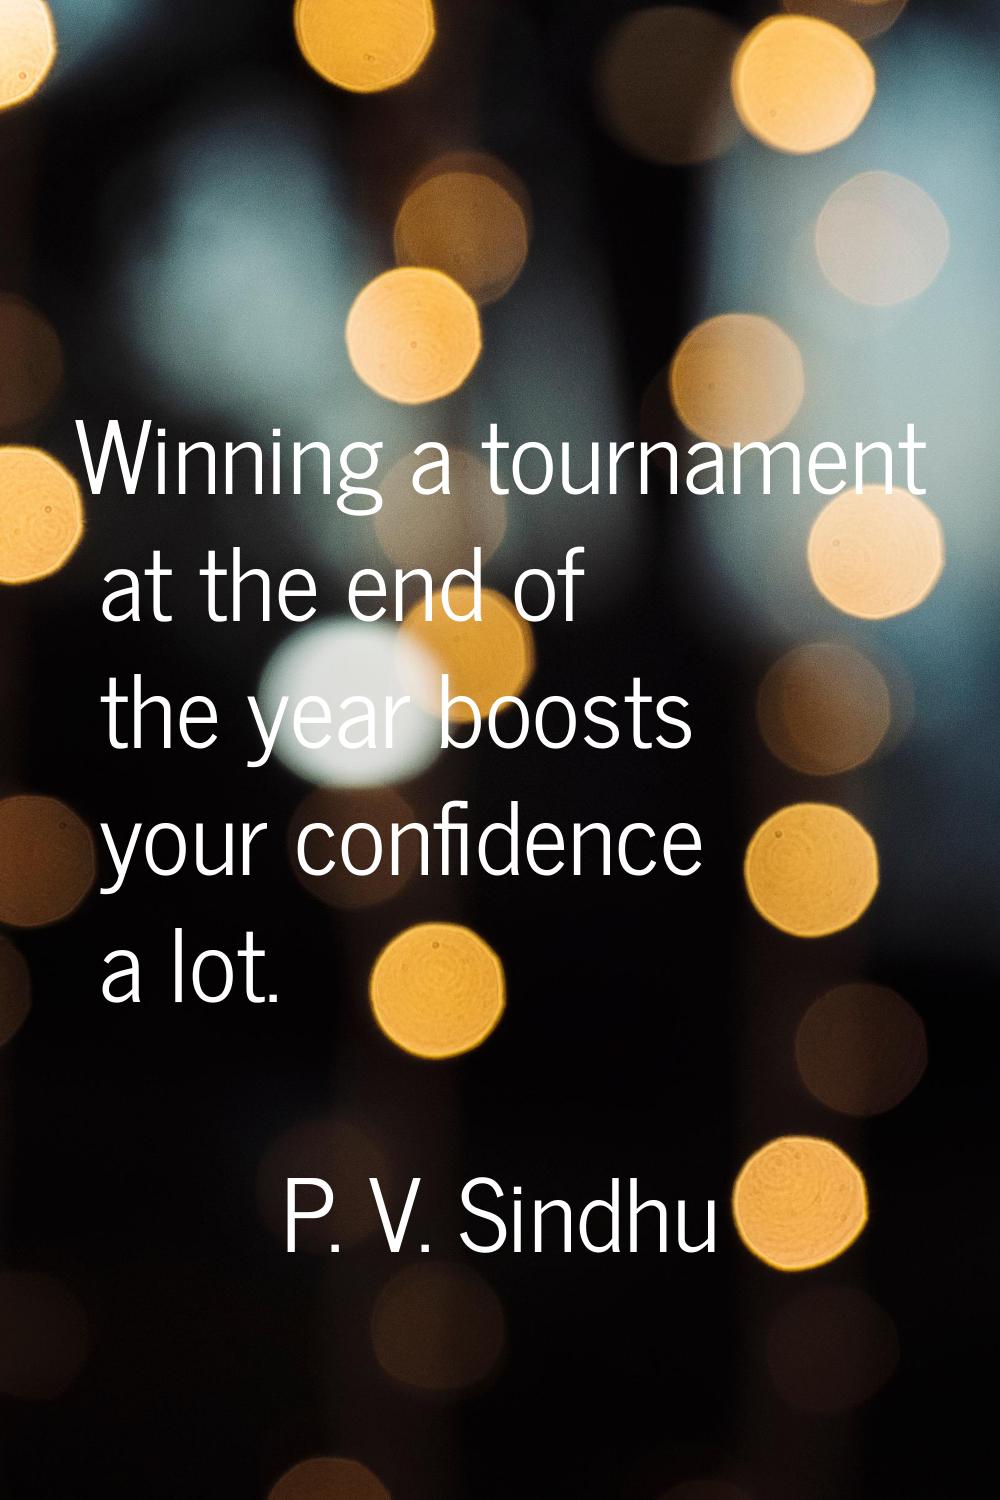 Winning a tournament at the end of the year boosts your confidence a lot.